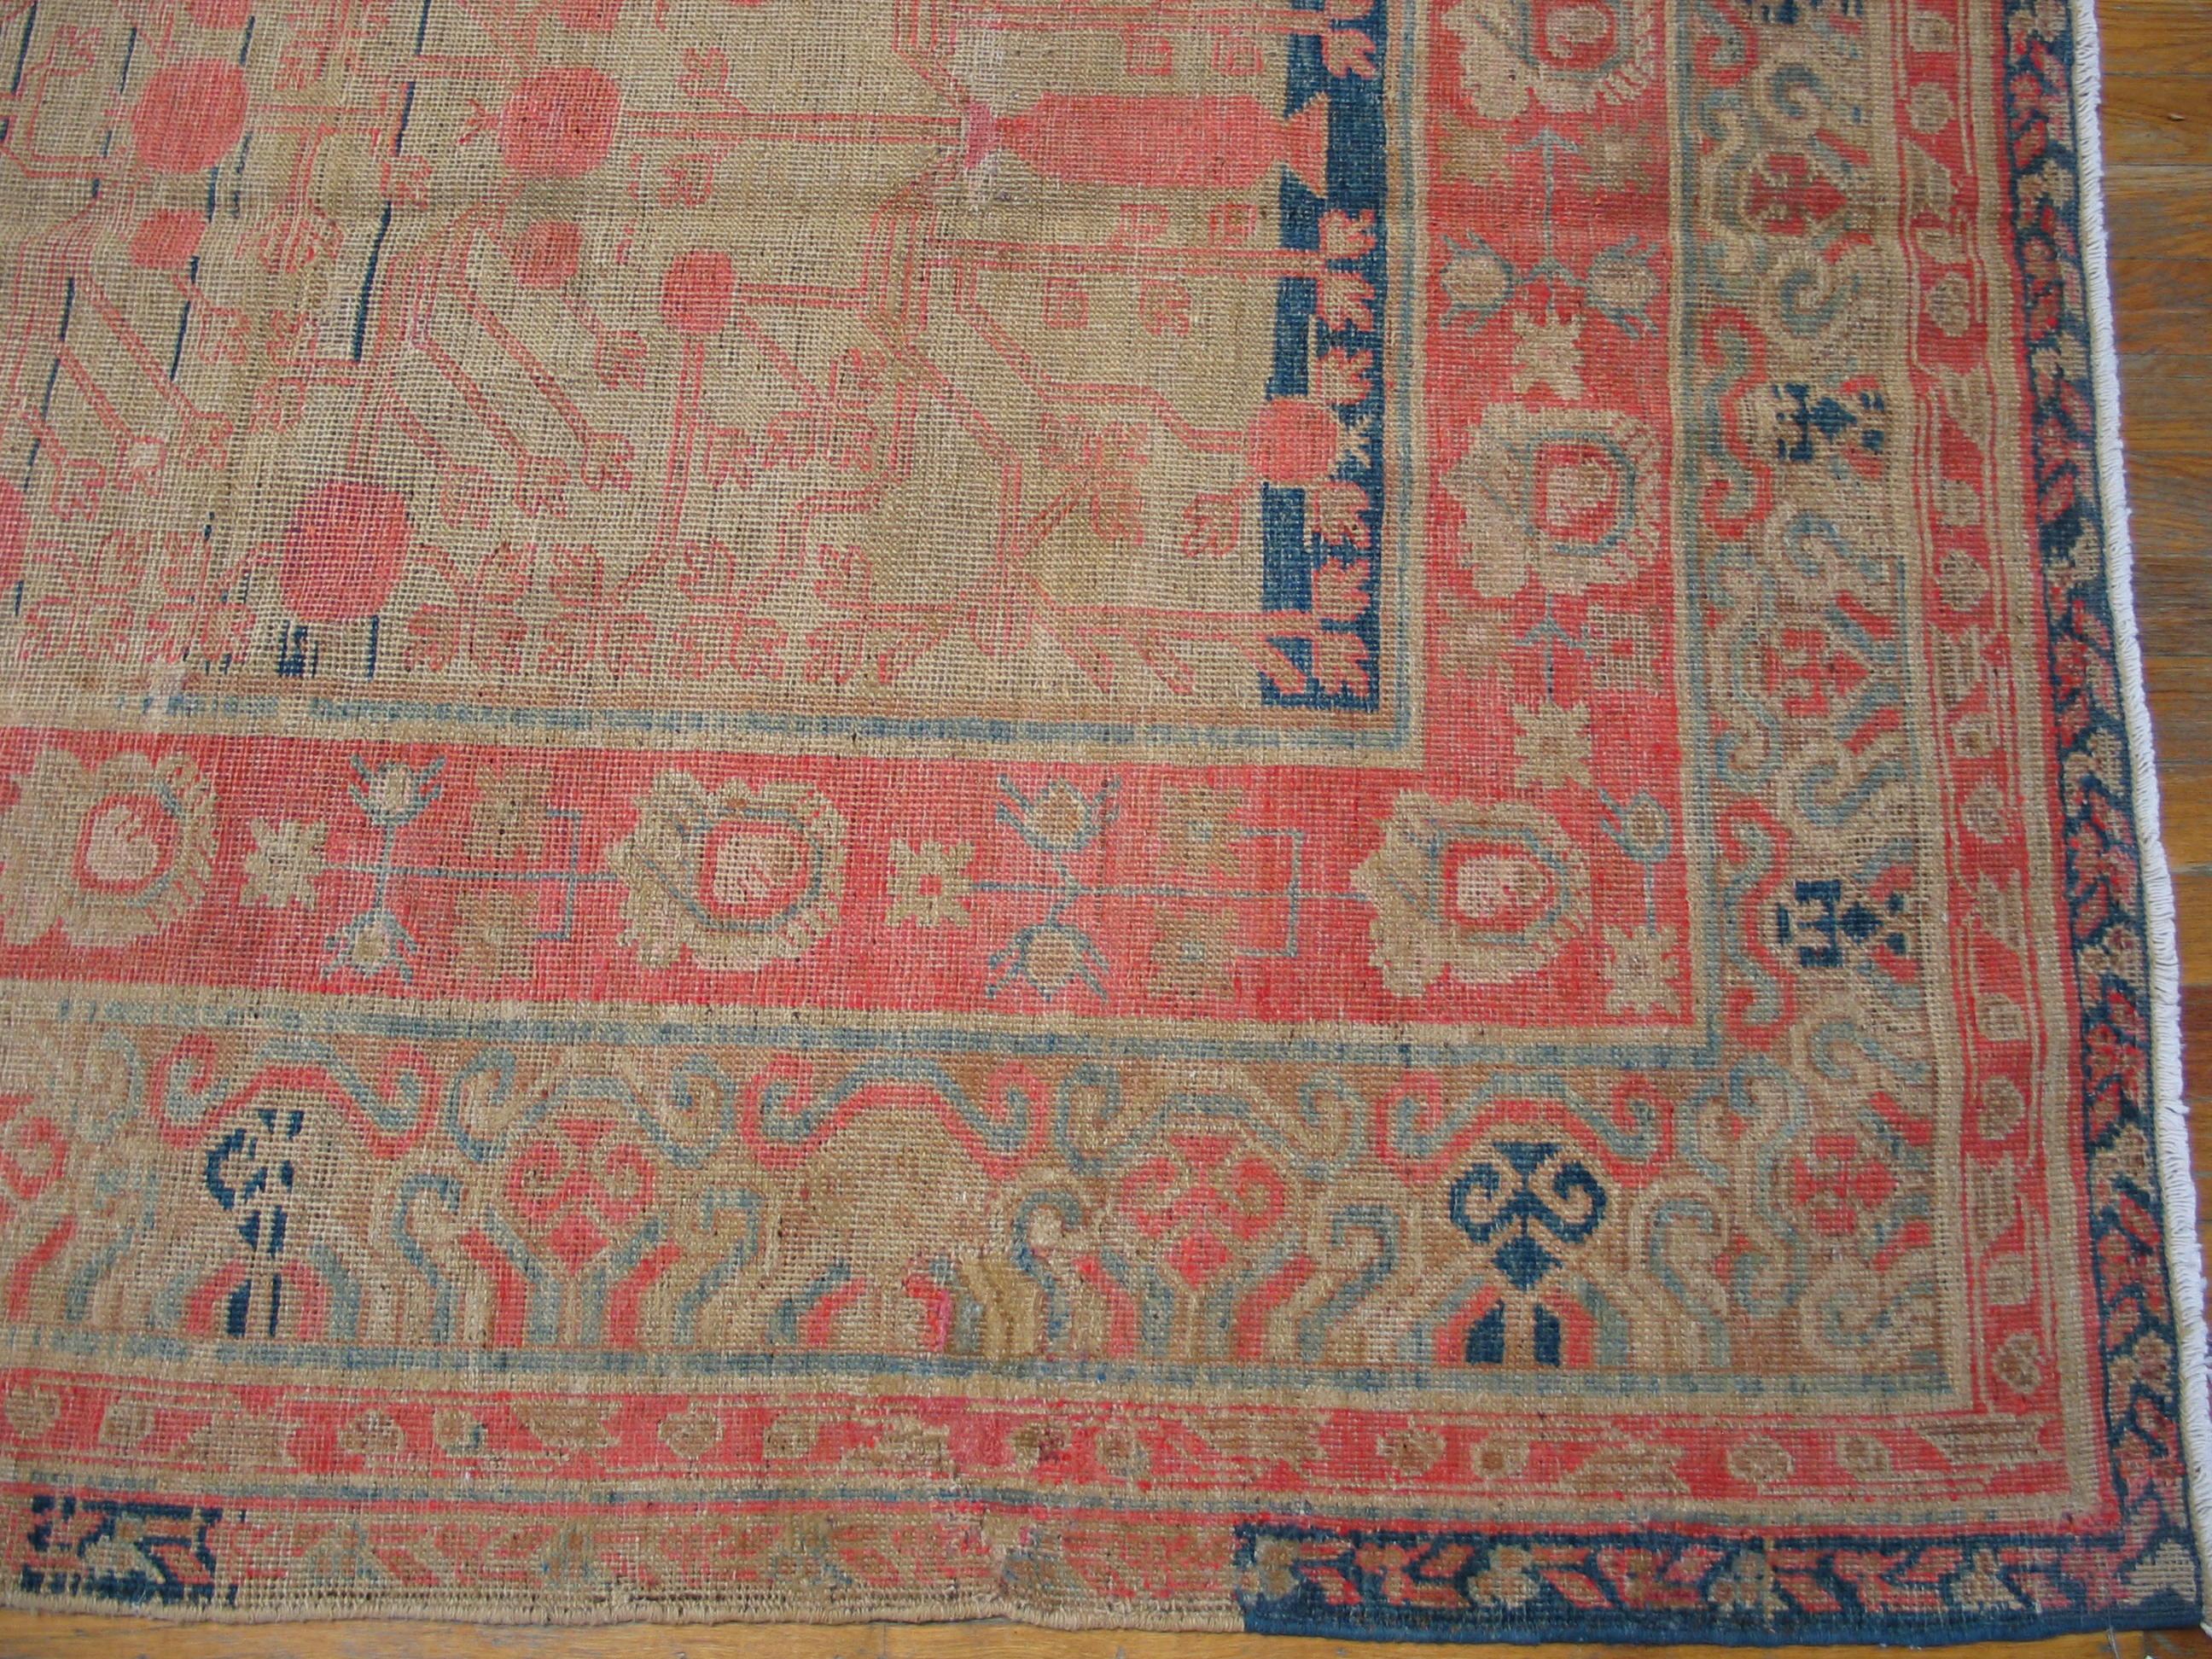 Chinese Early 20th Century Central Asian Khotan Carpet ( 7'4